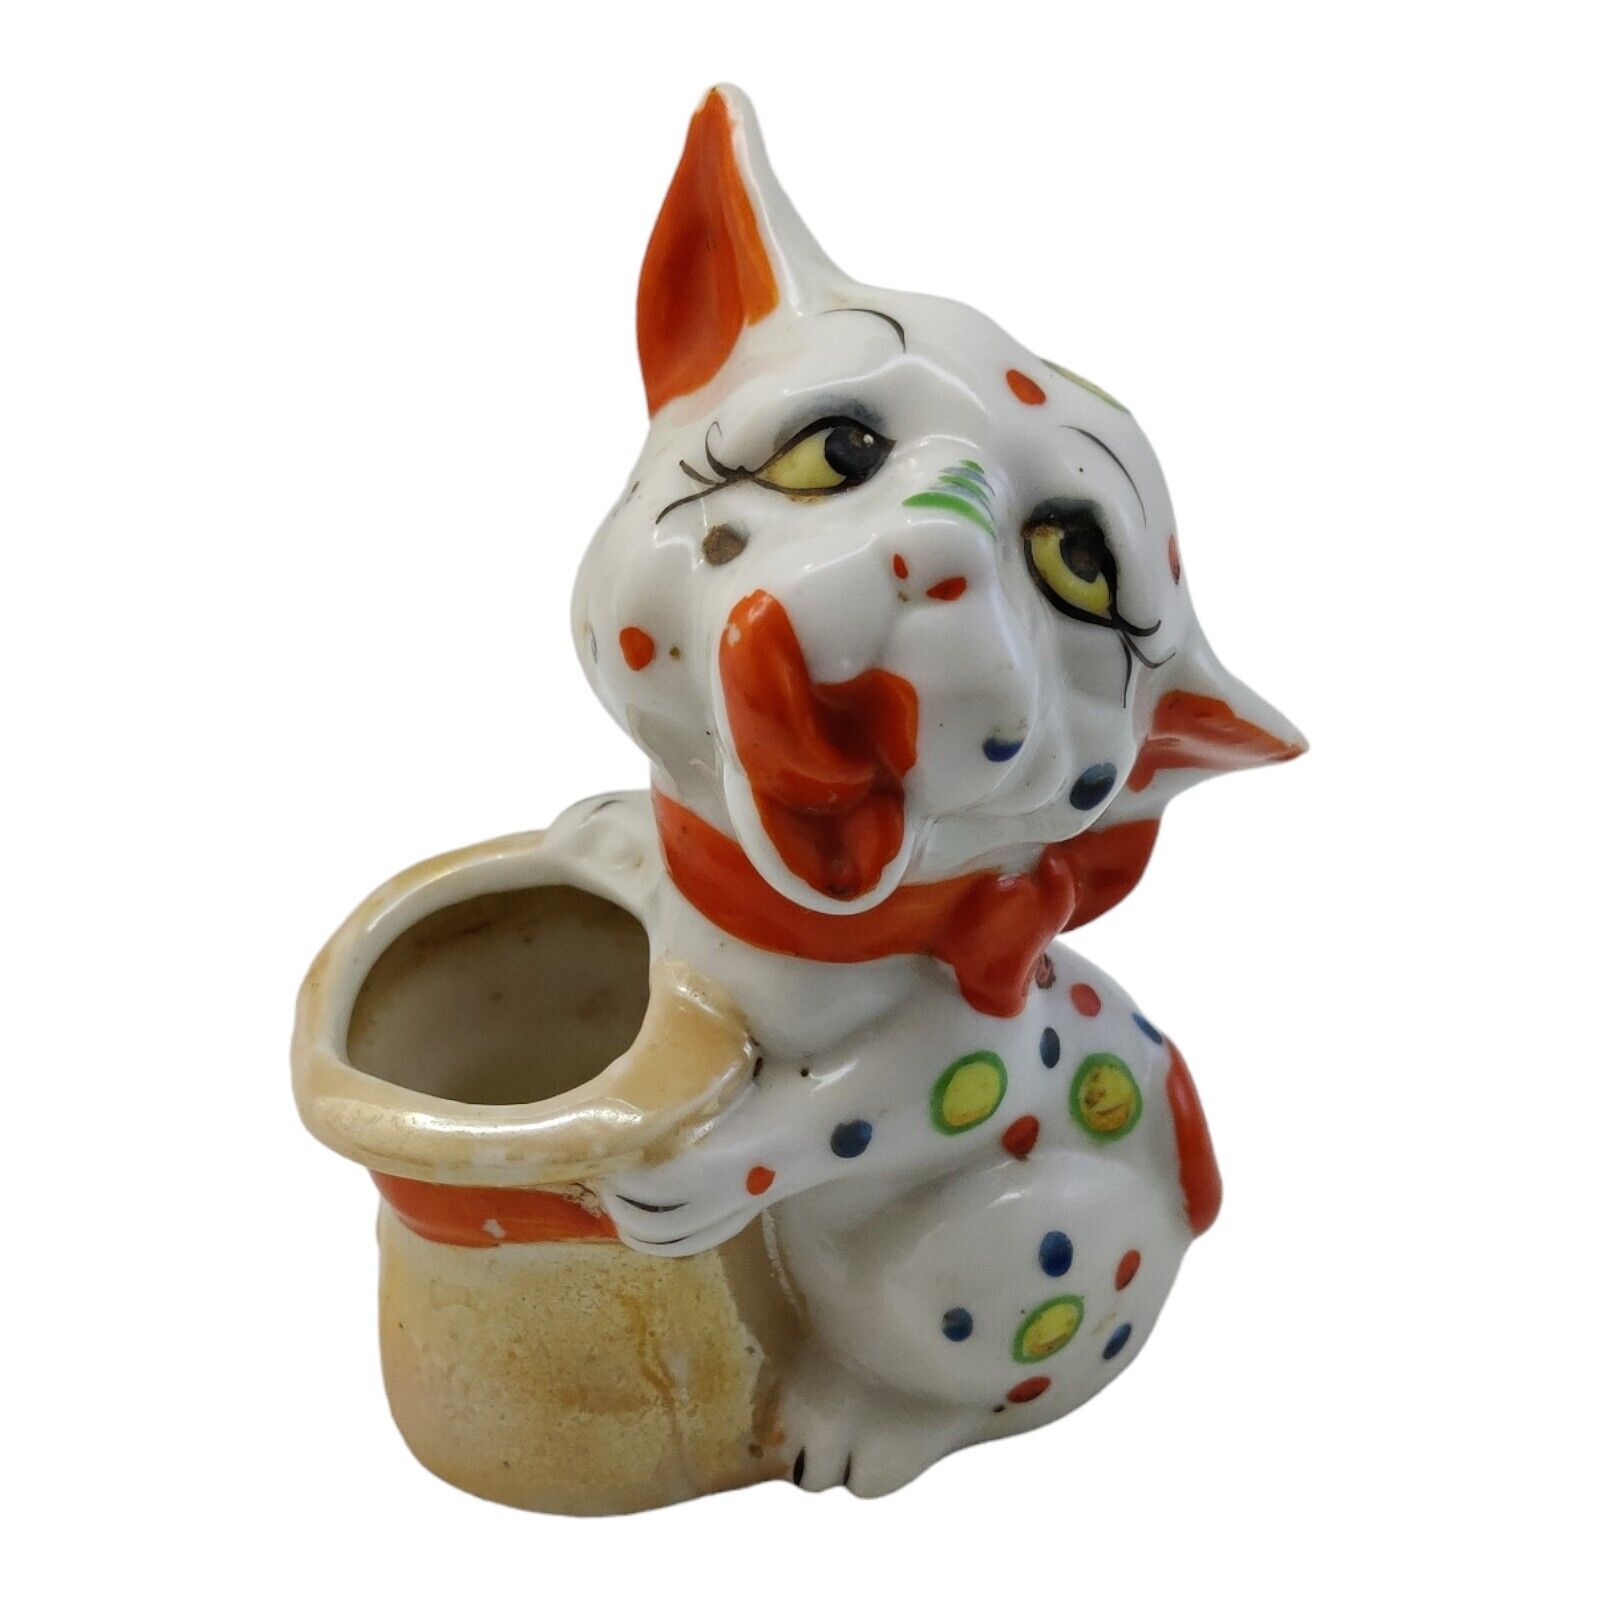 Bonzo the Dog Toothpick Holder Planter Made in Japan